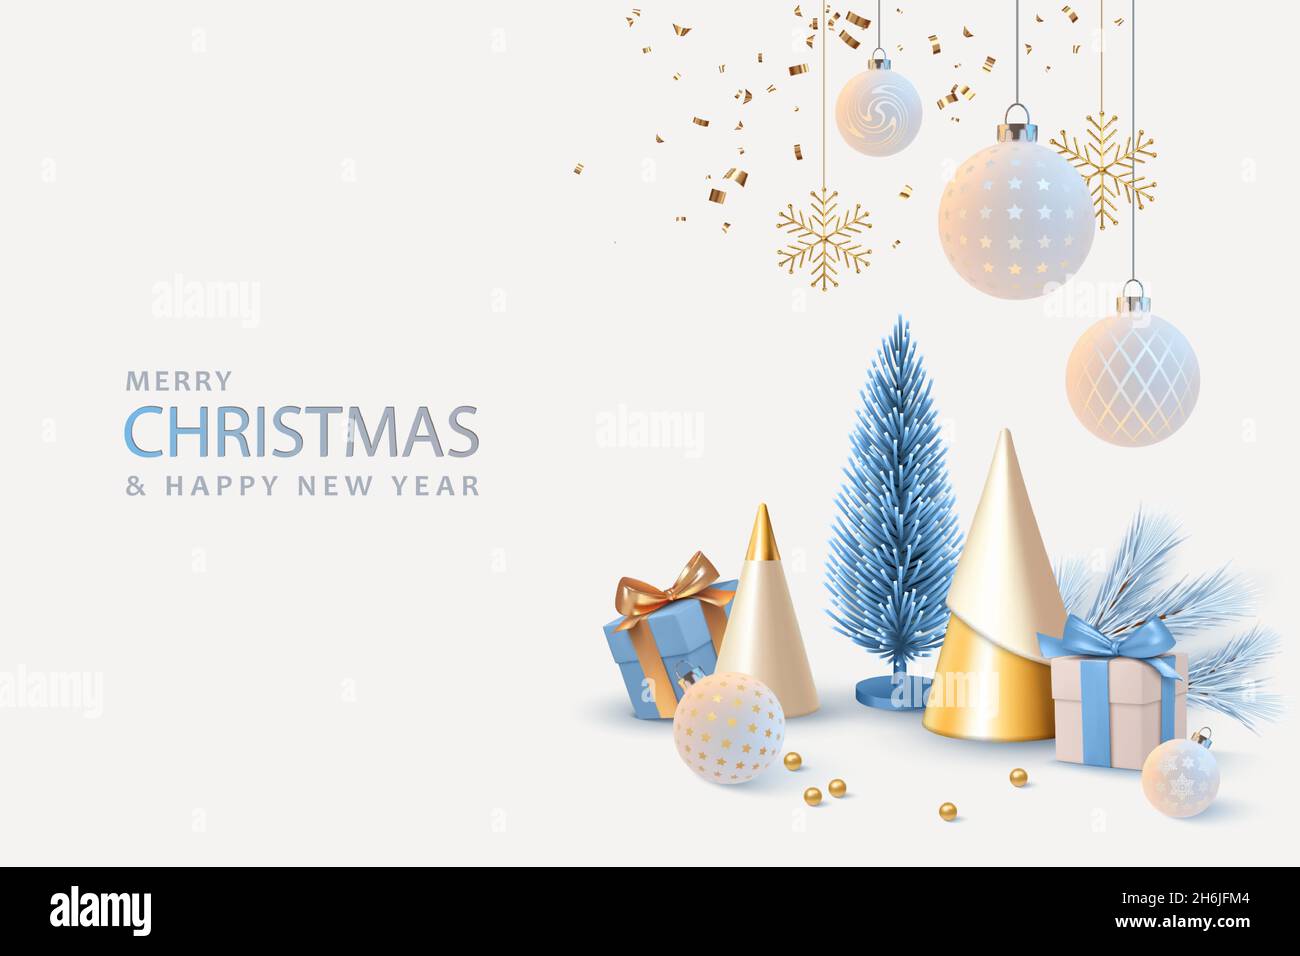 Christmas and New Year realistic banner. Christmas composition of golden cone-shaped and foil Christmas trees. Gifts and traditional decorations on a Stock Vector